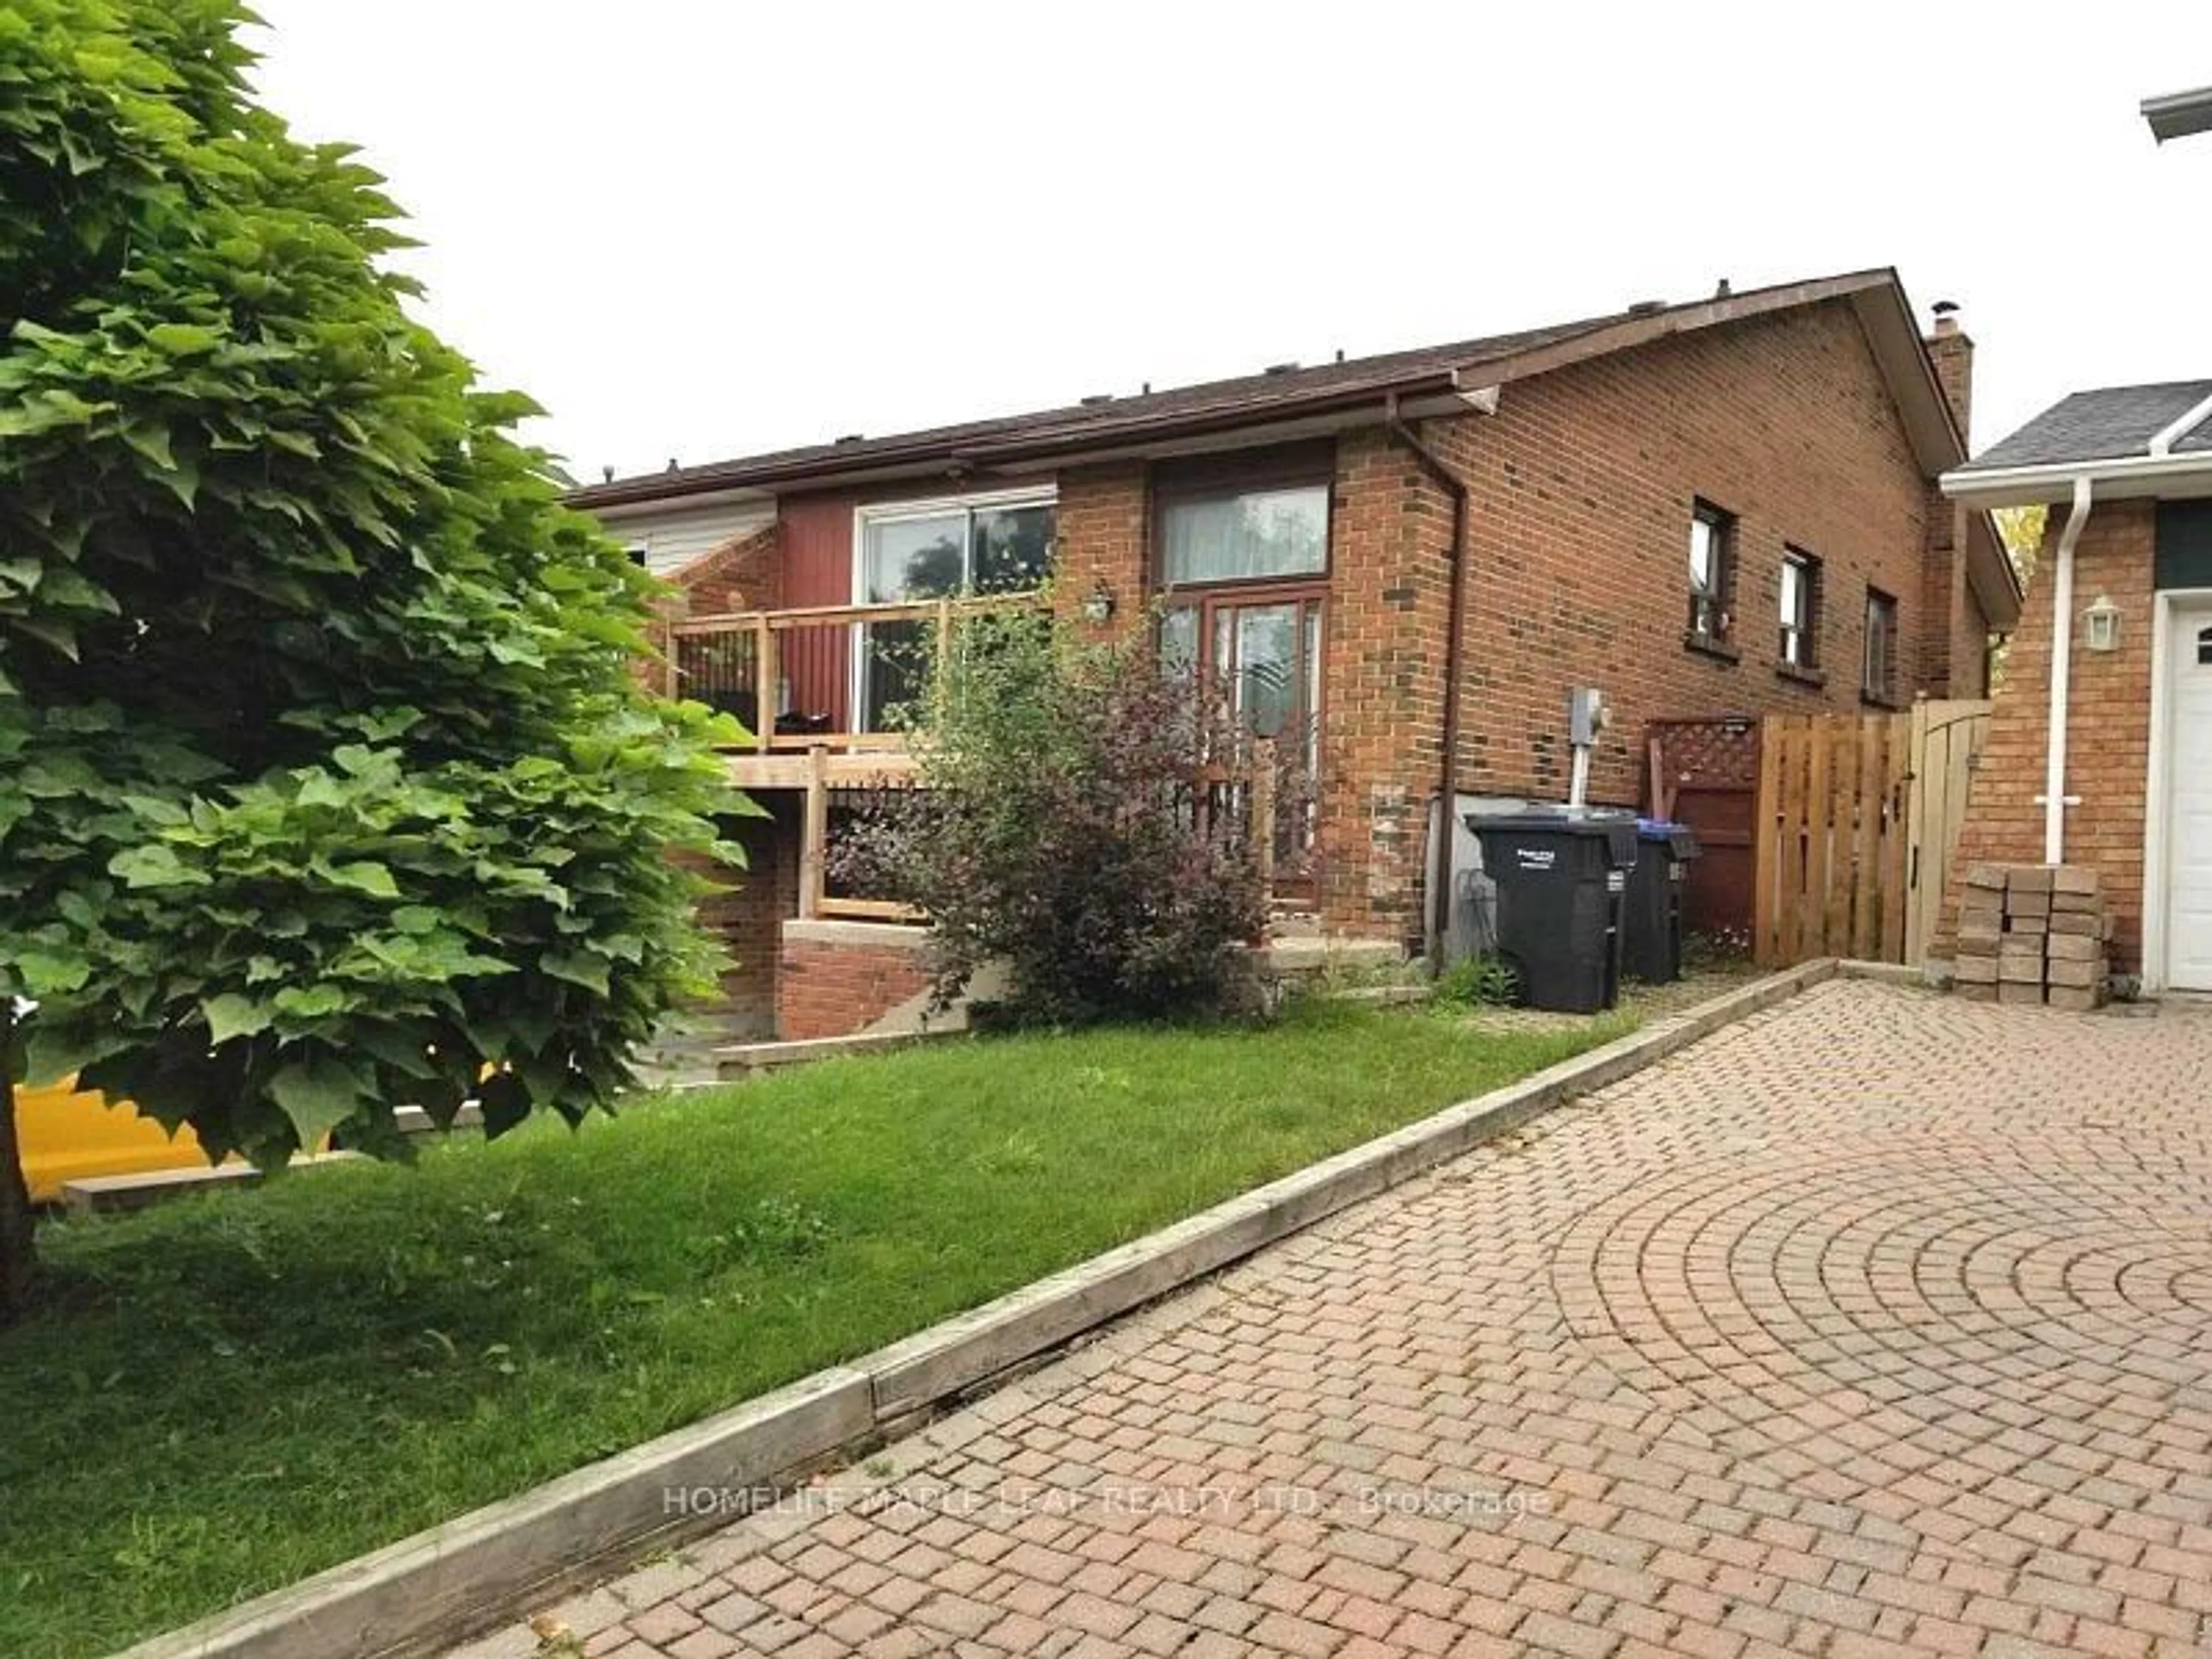 Home with brick exterior material for 36 Carter Dr, Brampton Ontario L6V 3N5